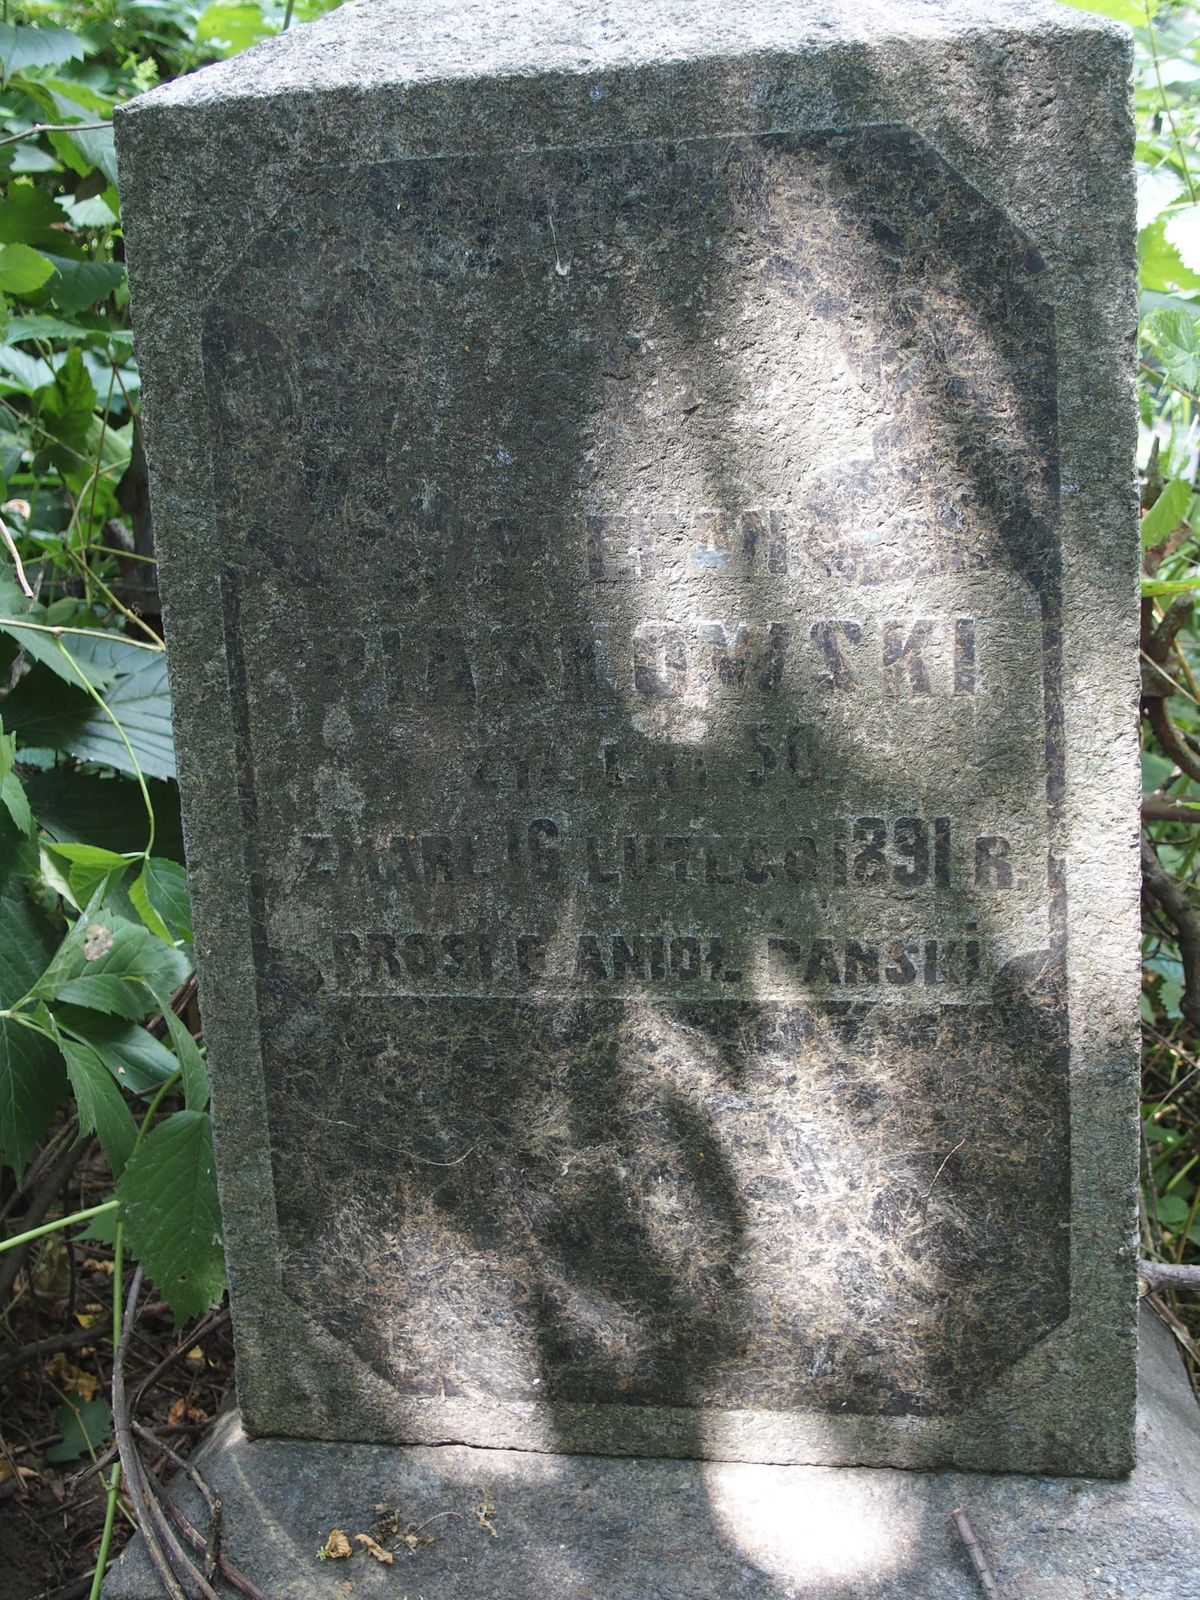 Inscription from the tombstone of Stefan Piaskowski